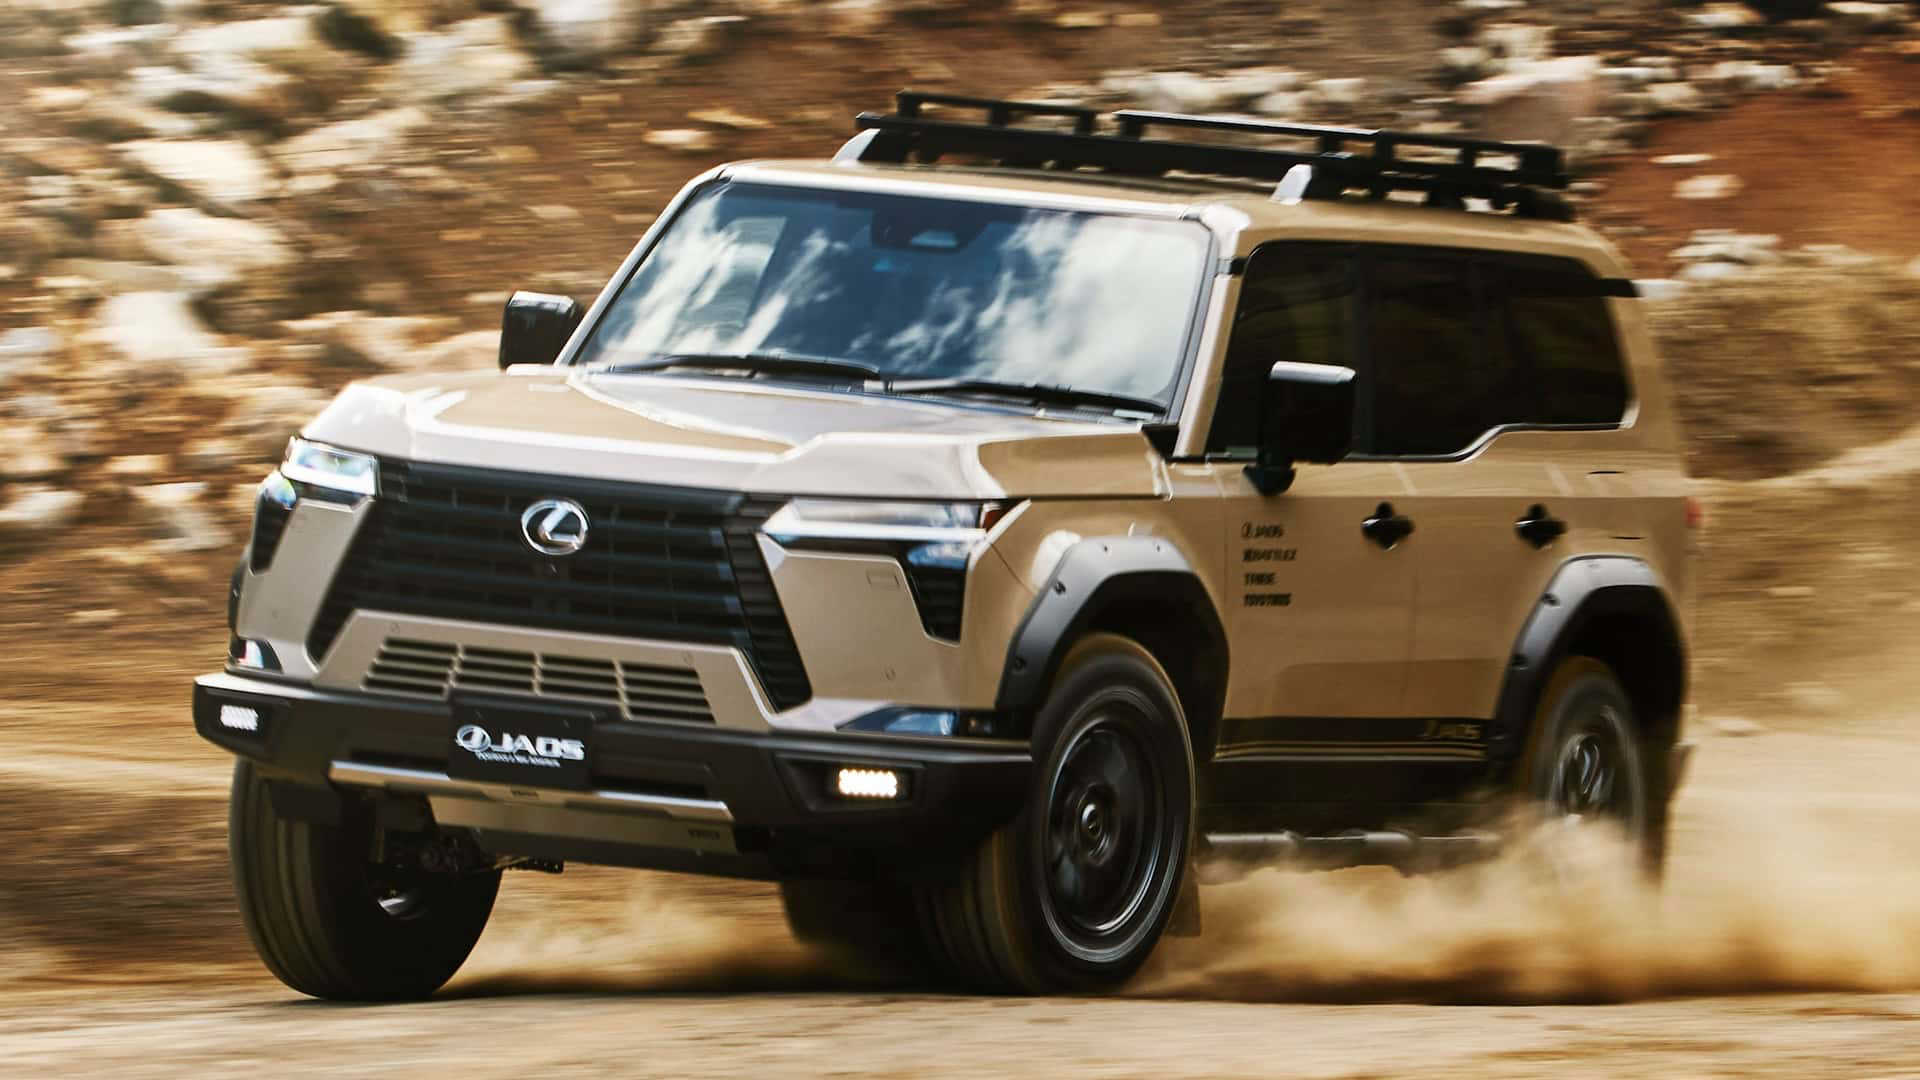 This Lifted Lexus GX Is An Overlanding Dream